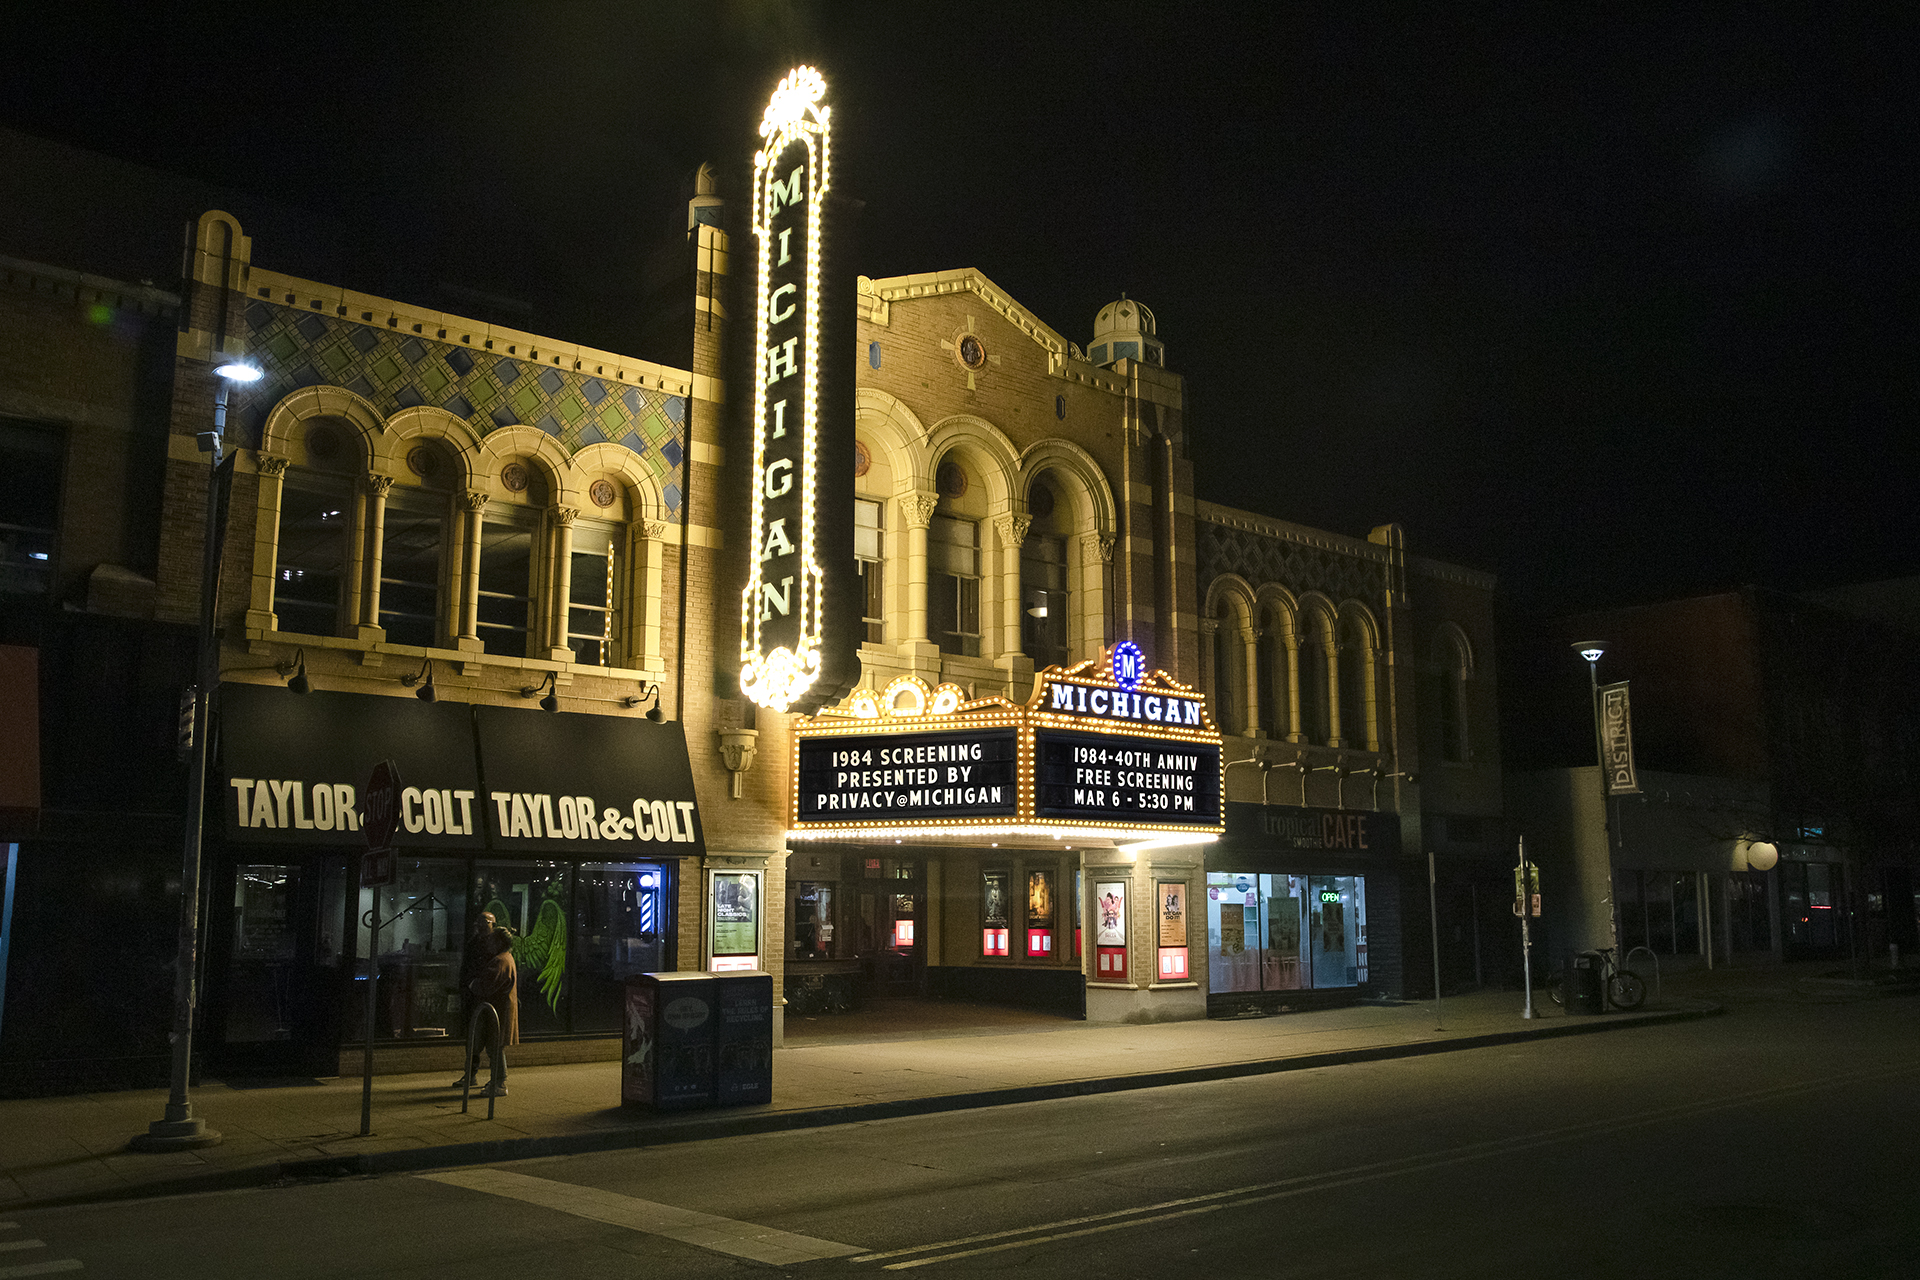 The Ann Arbor Michigan Theater marquee lit up at night. The marquee has information for the privacy at Michigan 1984 40th-anniversary screening.